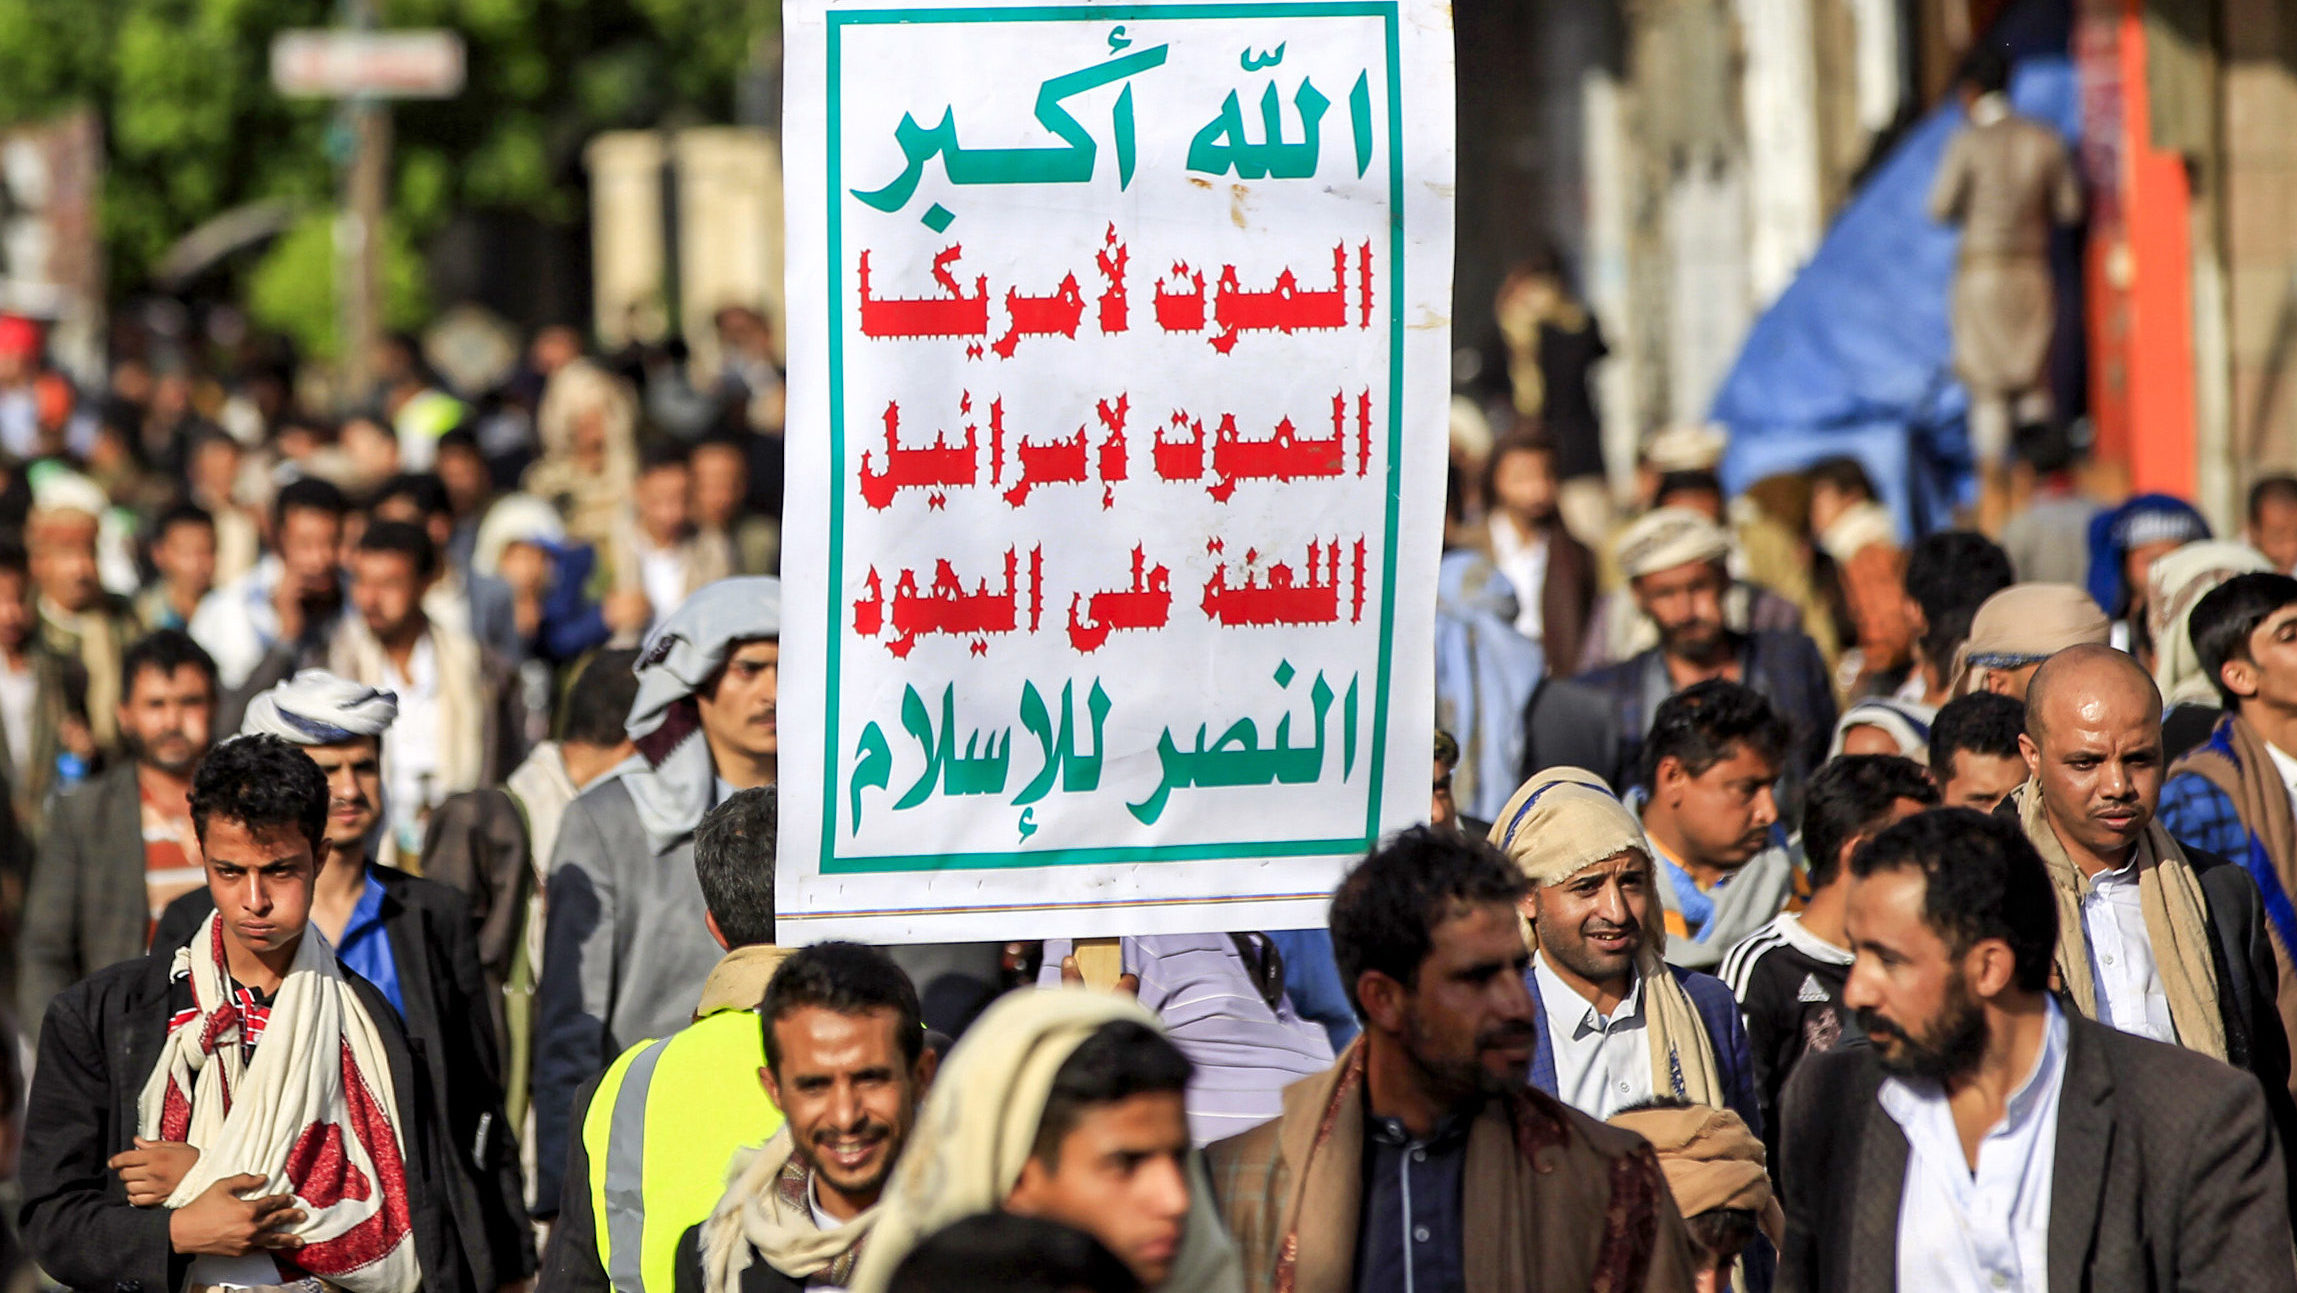 EXCLUSIVE: The End of Jewish Yemen is Imminent